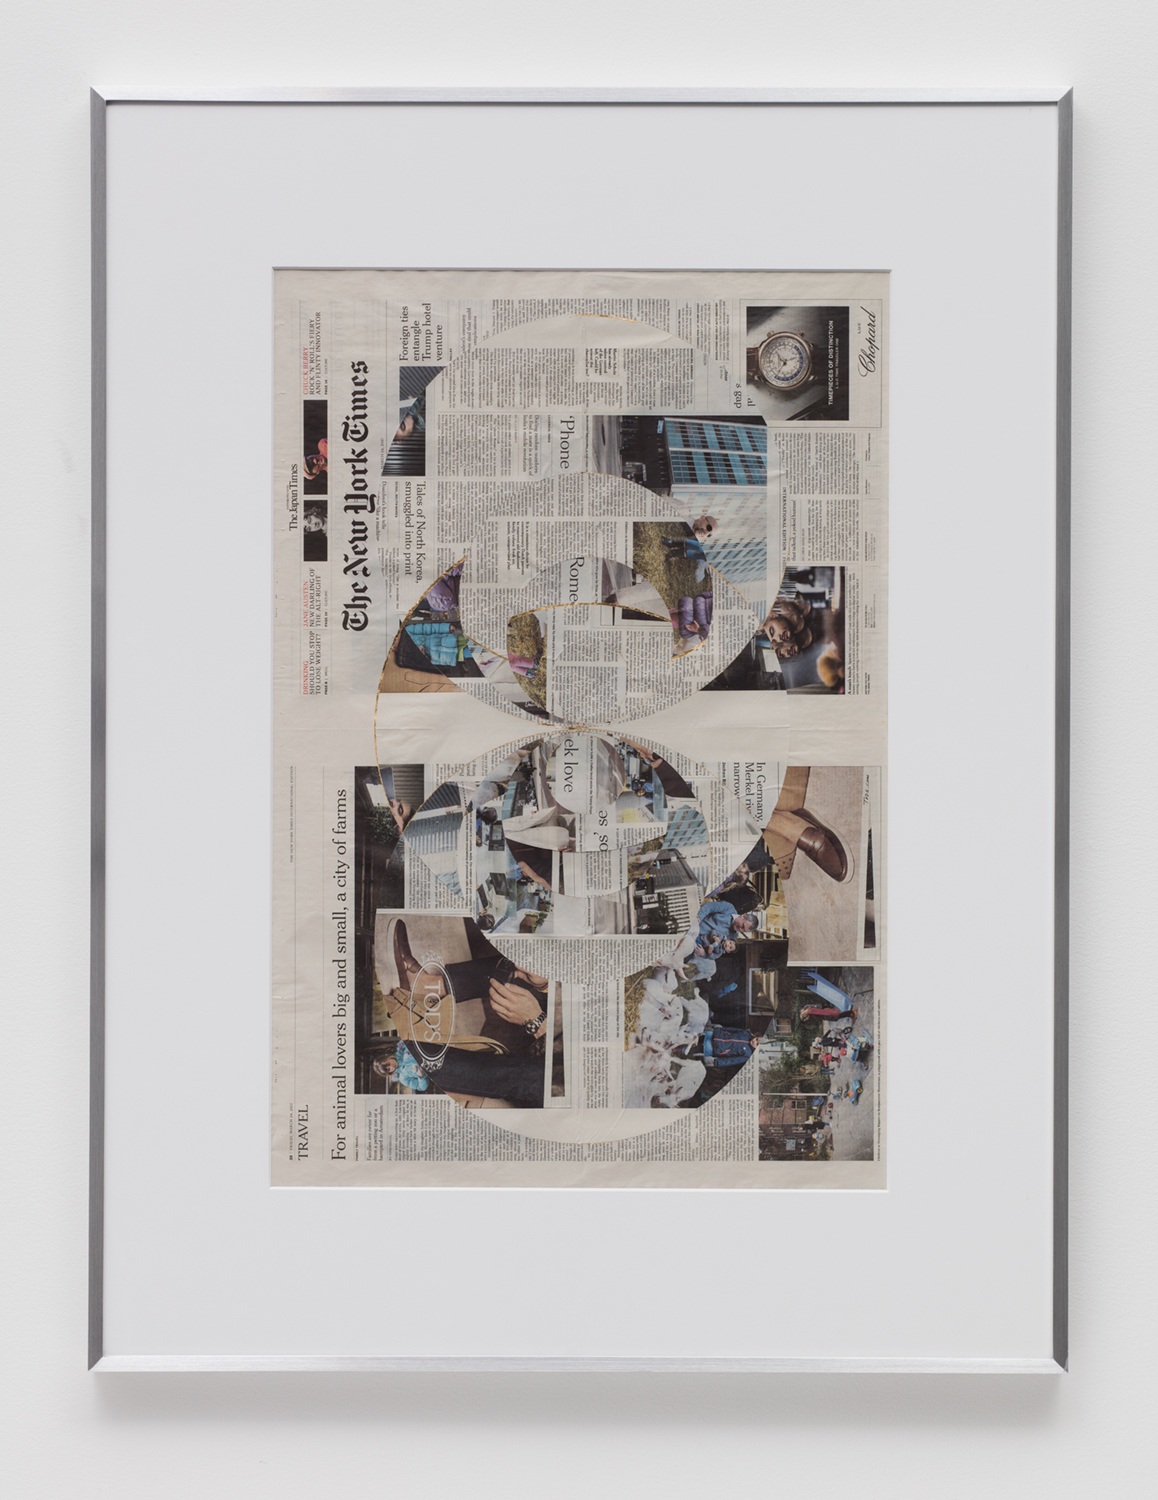   Blind Collage (Four 180º Rotations, The New York Times International Edition, Distributed with The Japan Times, Friday, March 24, 2017)    2017   Newspaper, tape, and 22 karat gold leaf  43 5/8 x 33 1/8 inches   Blind Collages, 2017–     